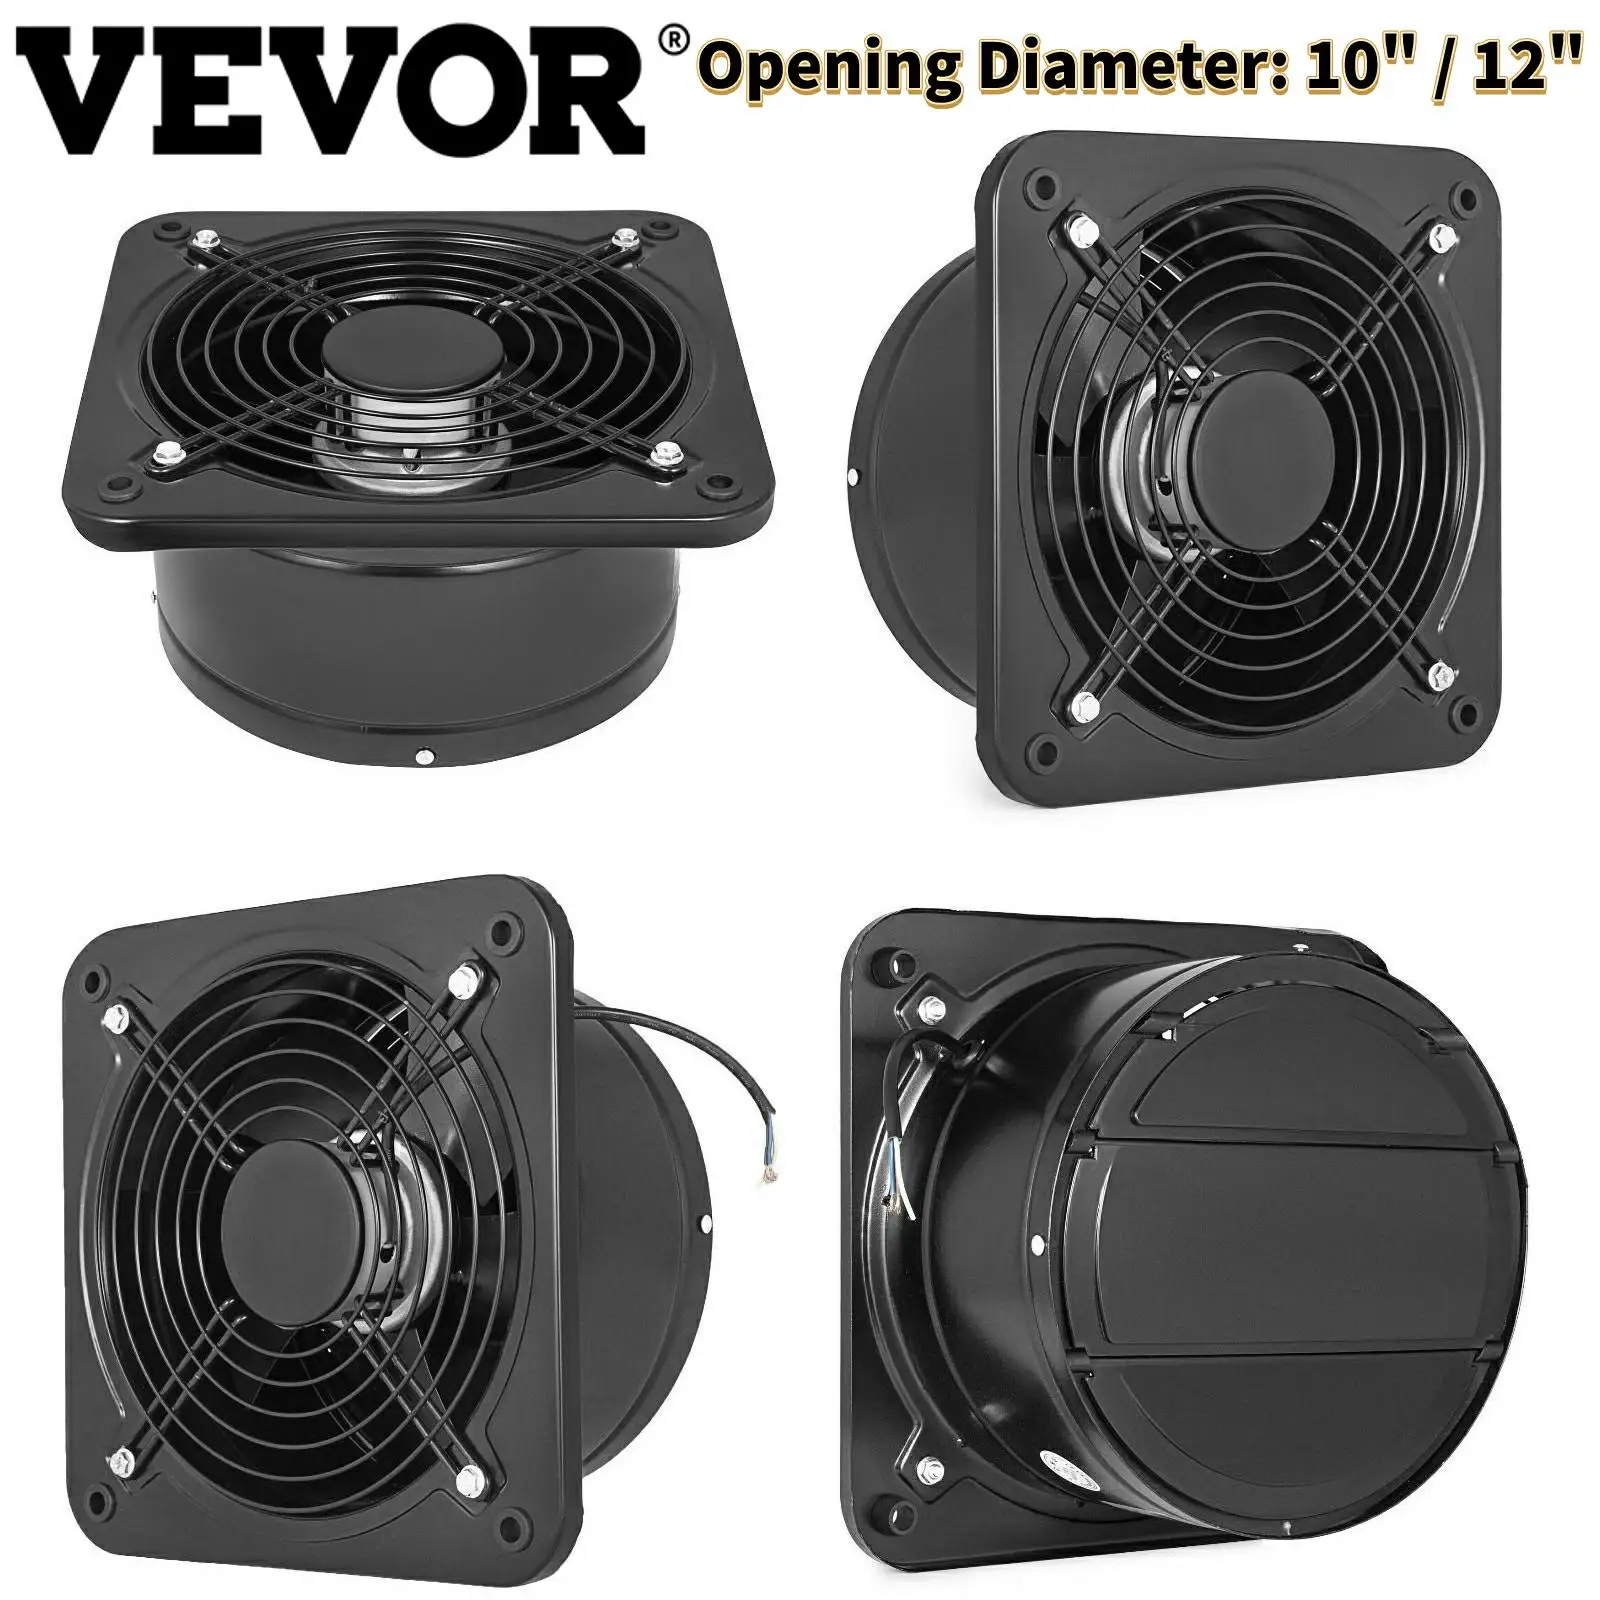 

VEVOR Industrial Ventilation Extractor Exhaust Fan 10" 12" 74.5W 150W Air Blower High Speed Low Noise for Workshop and Warehouse